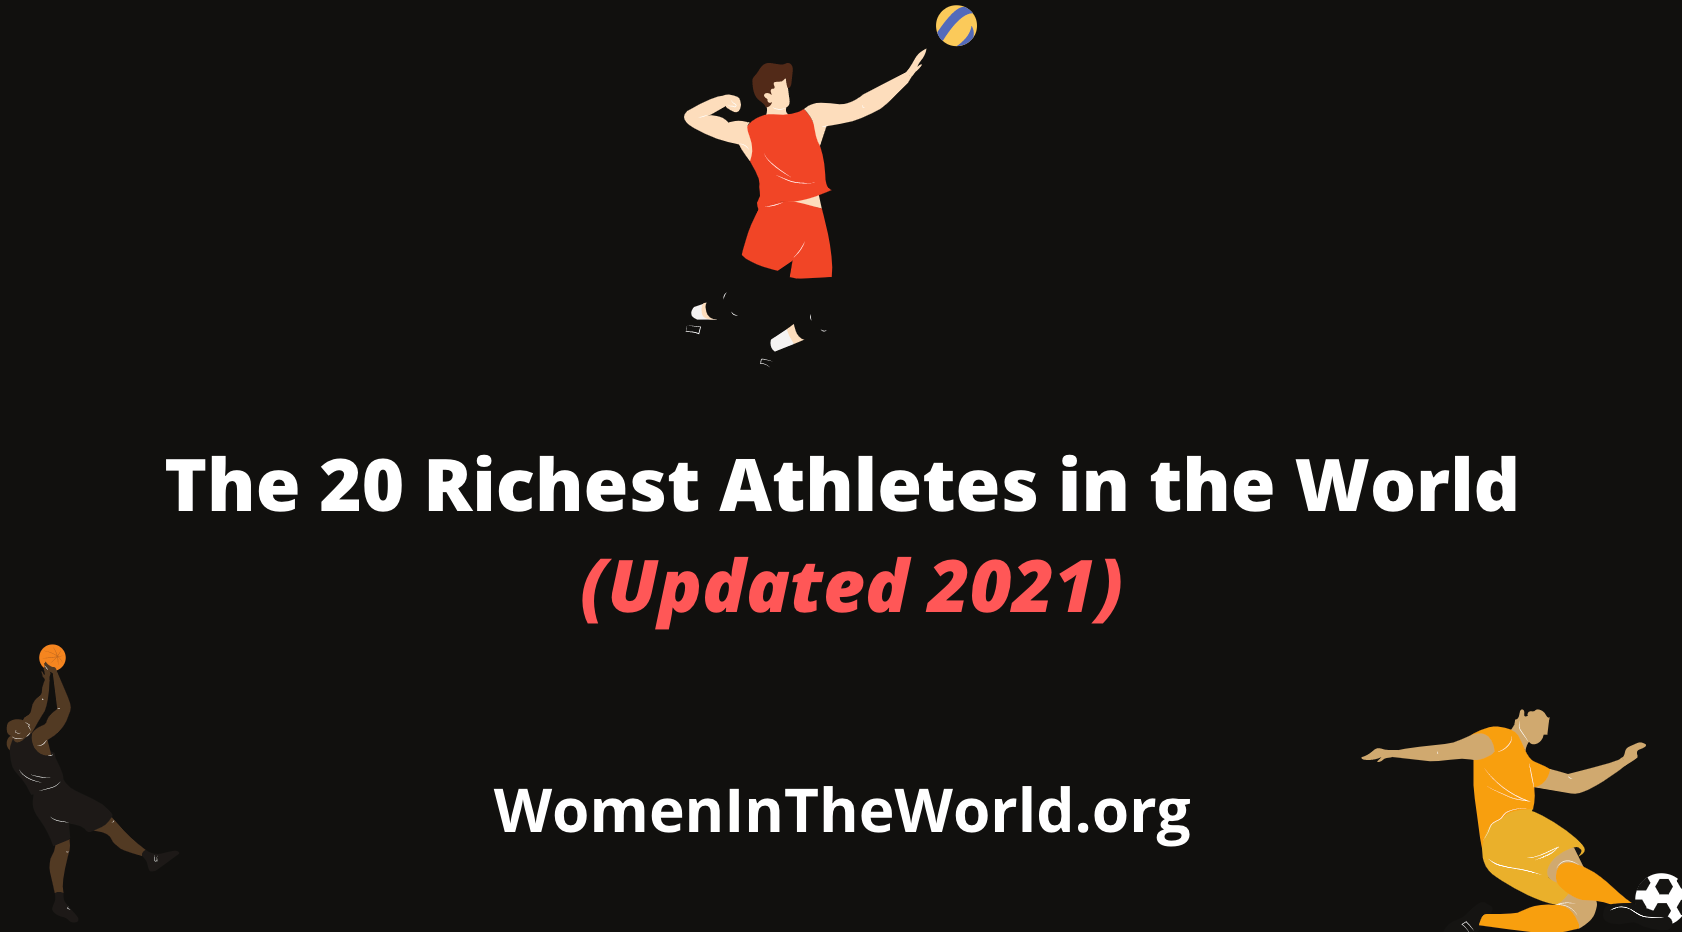 Top 20 Richest Athletes in The World (Updated 2021)